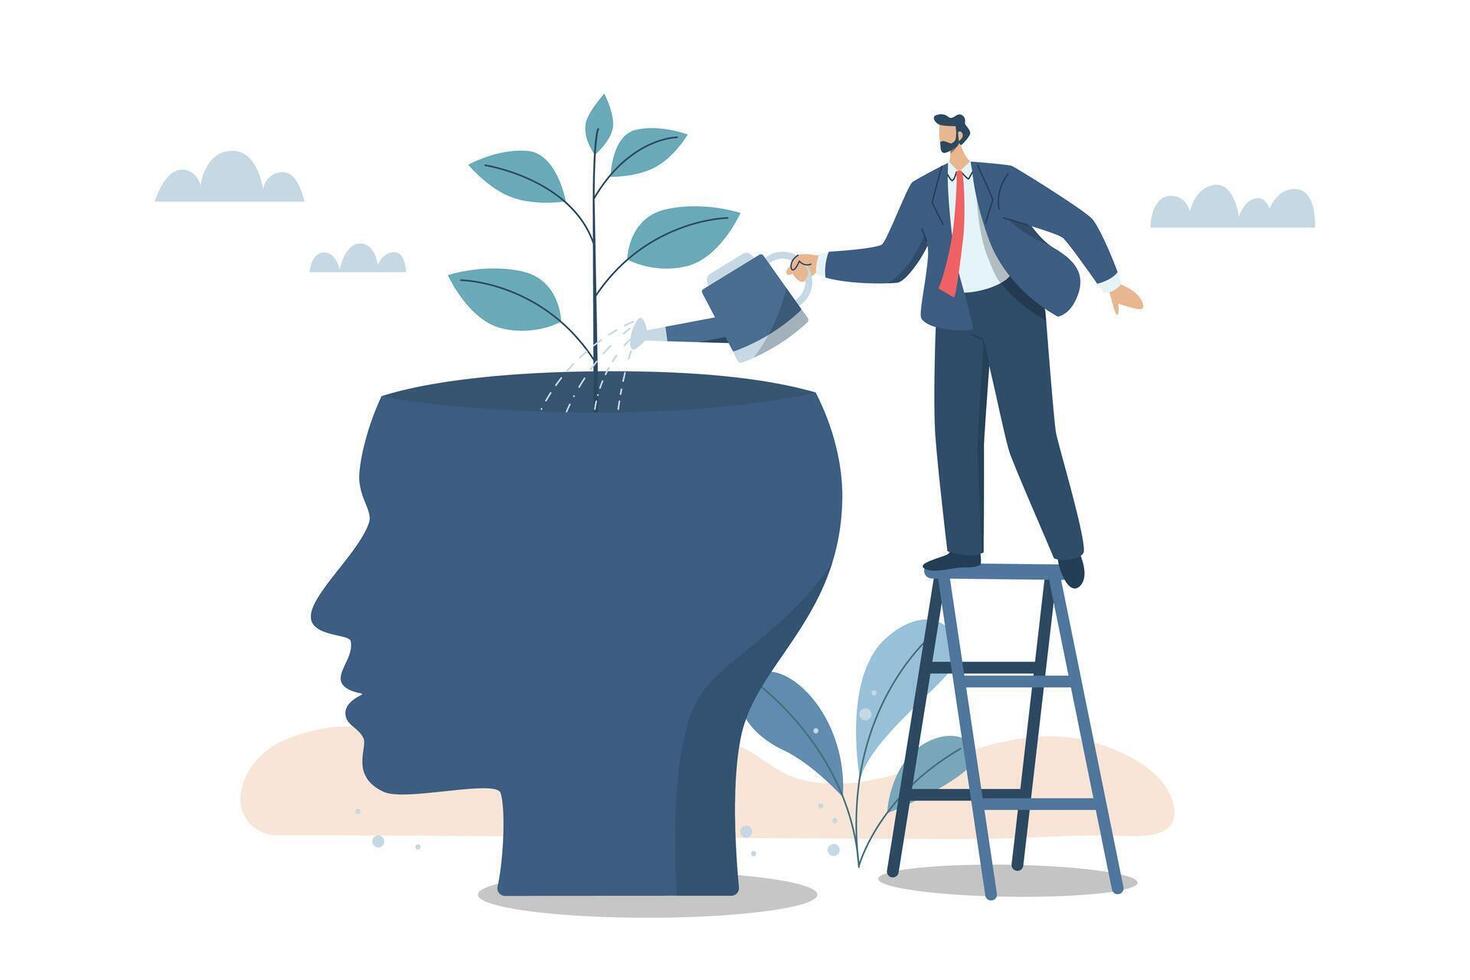 Growth of mental state, Personal growth, Self improvement, Development or improvement of personal concept, Learning professional level, Business man is watering the plant that grows from himself. vector